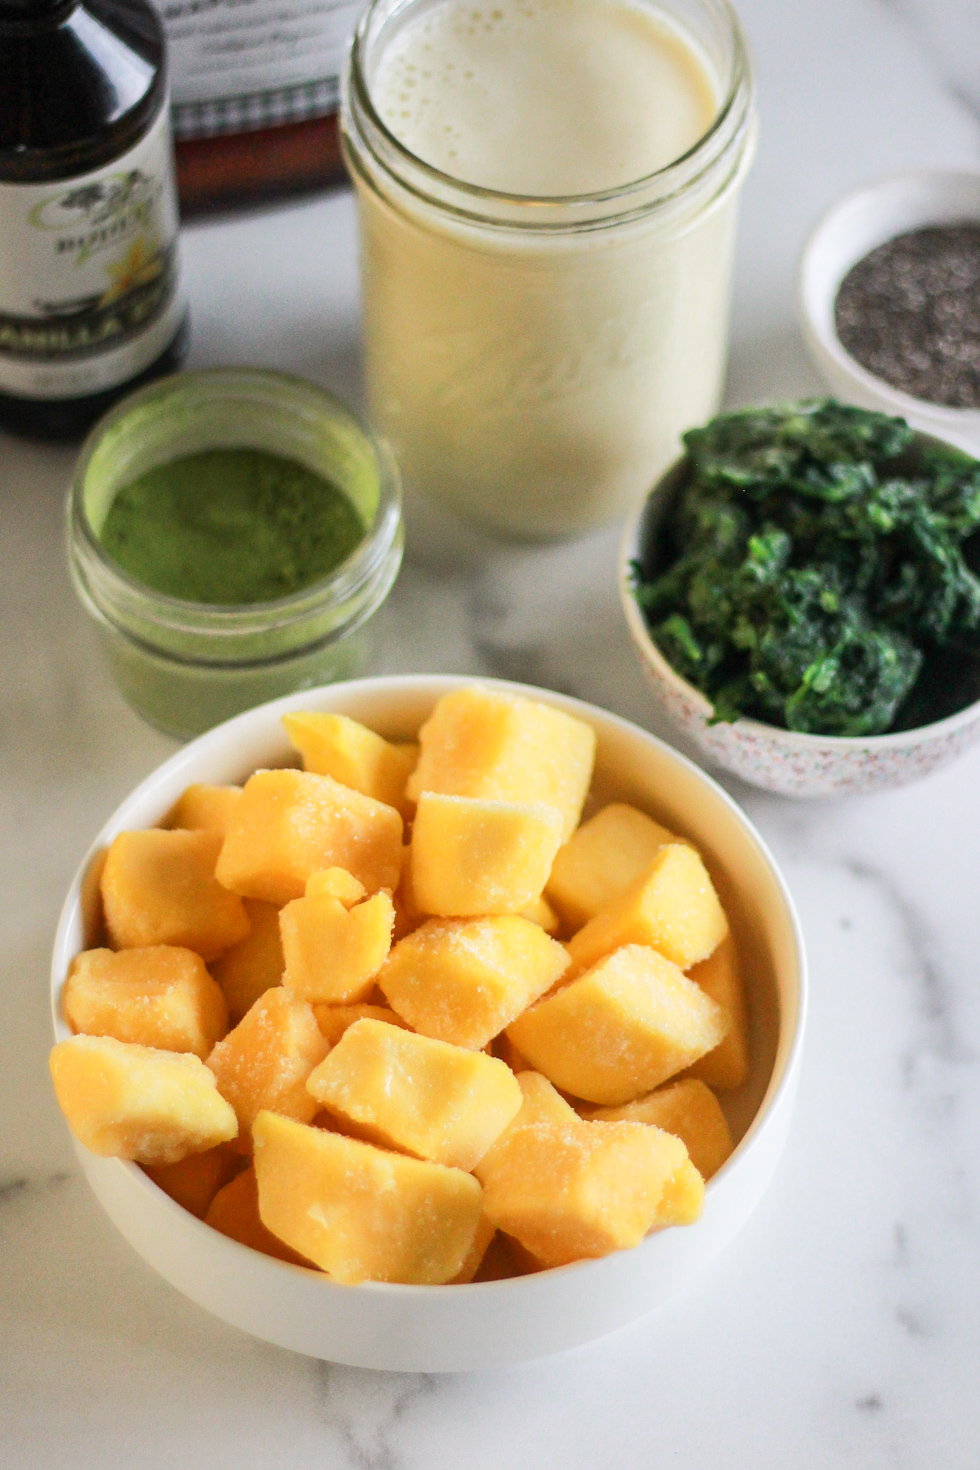 Bowls of mango, spinach, matcha, and chia seeds to make a green smoothie.